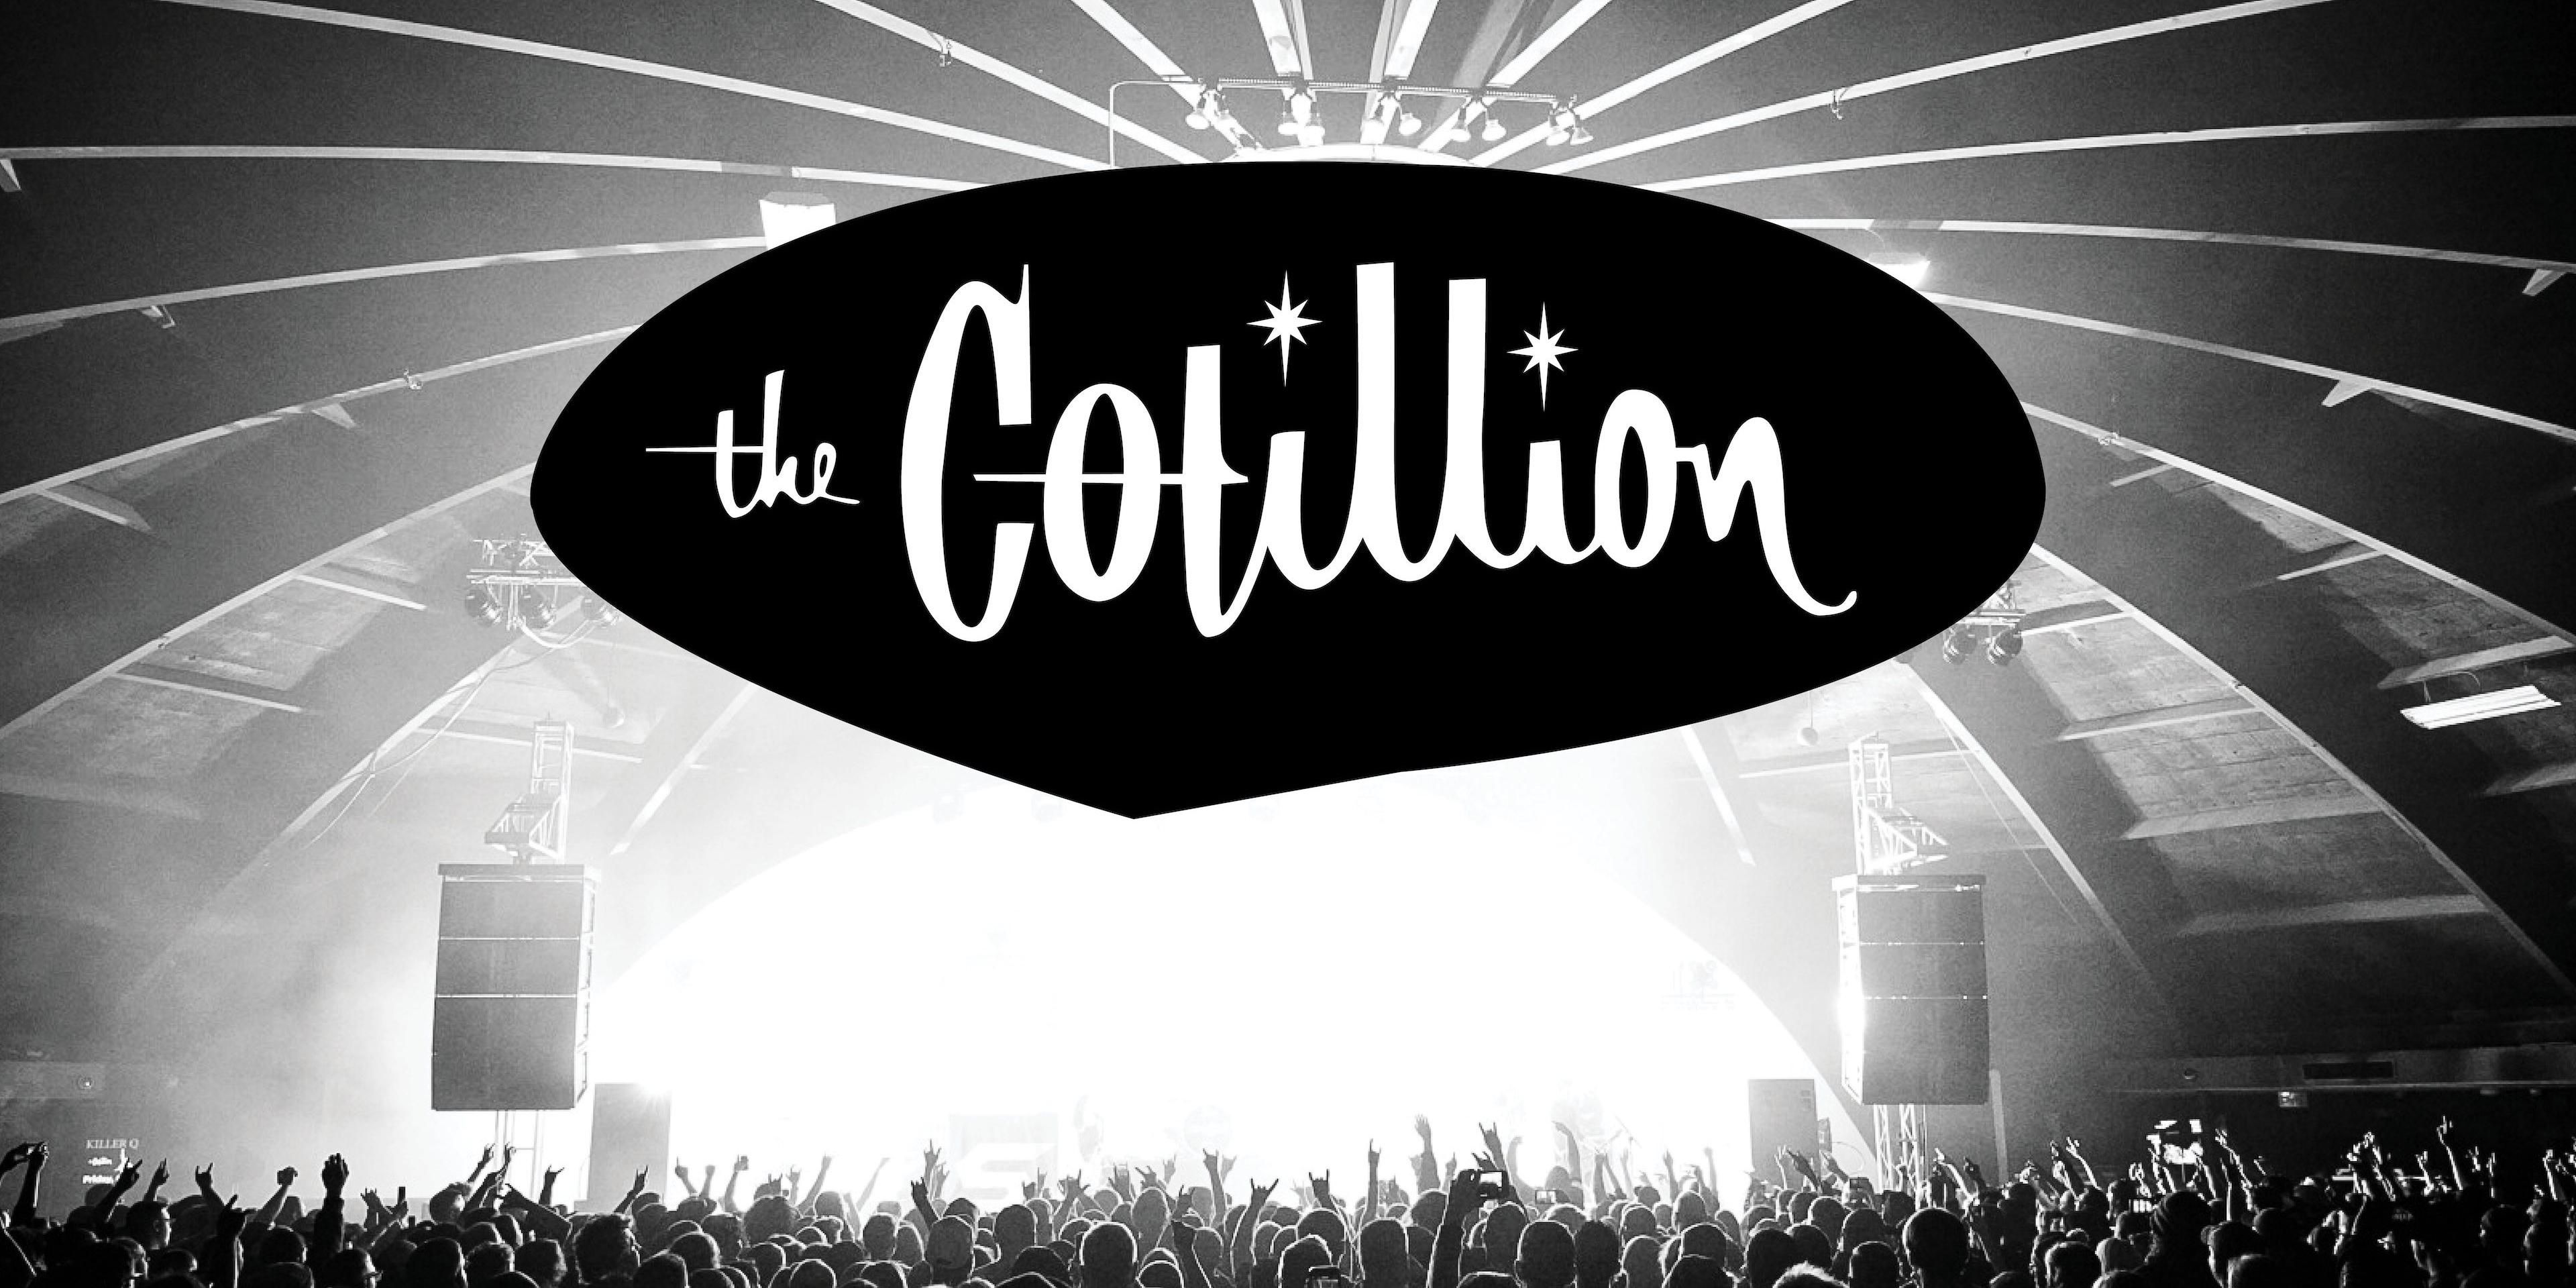 Built in 1960, The Cotillion is a historic special events facility that hosts concerts, dances and performances by nationally known artists. The unique structure features a domed wood ceiling over an 11,000 square foot floating hardwood dance floor. Holiday Inn Express & Suites Wichita Airport is one of the closest hotels.